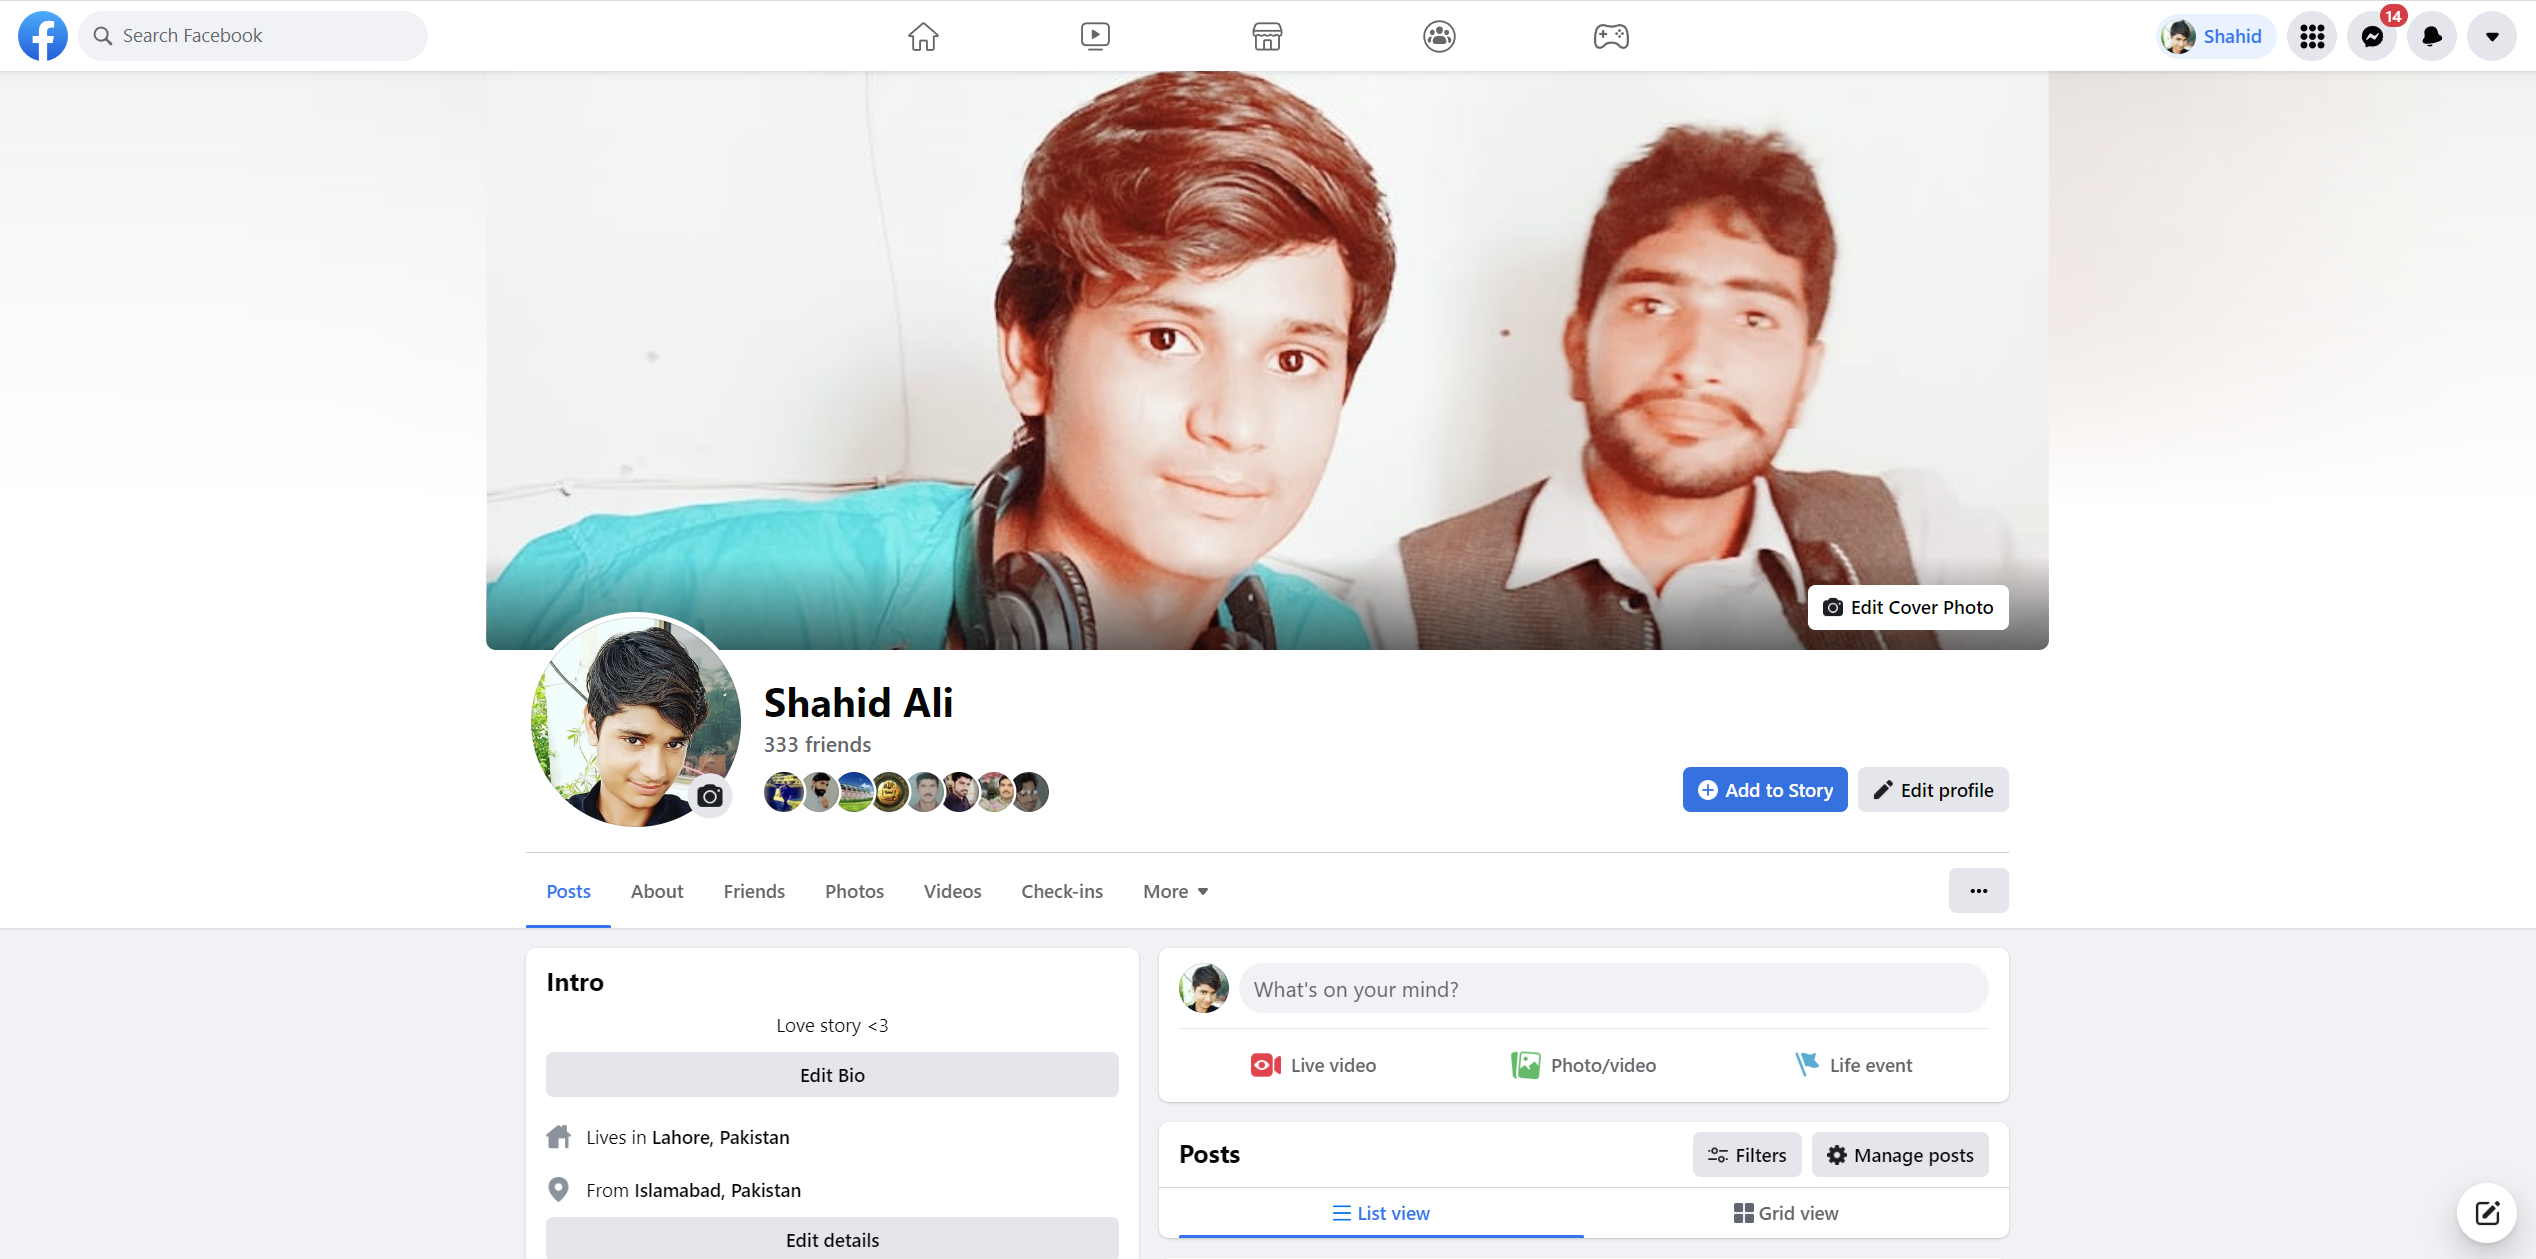 Pakistan Old Facebook Account - Daily spend limit 50$